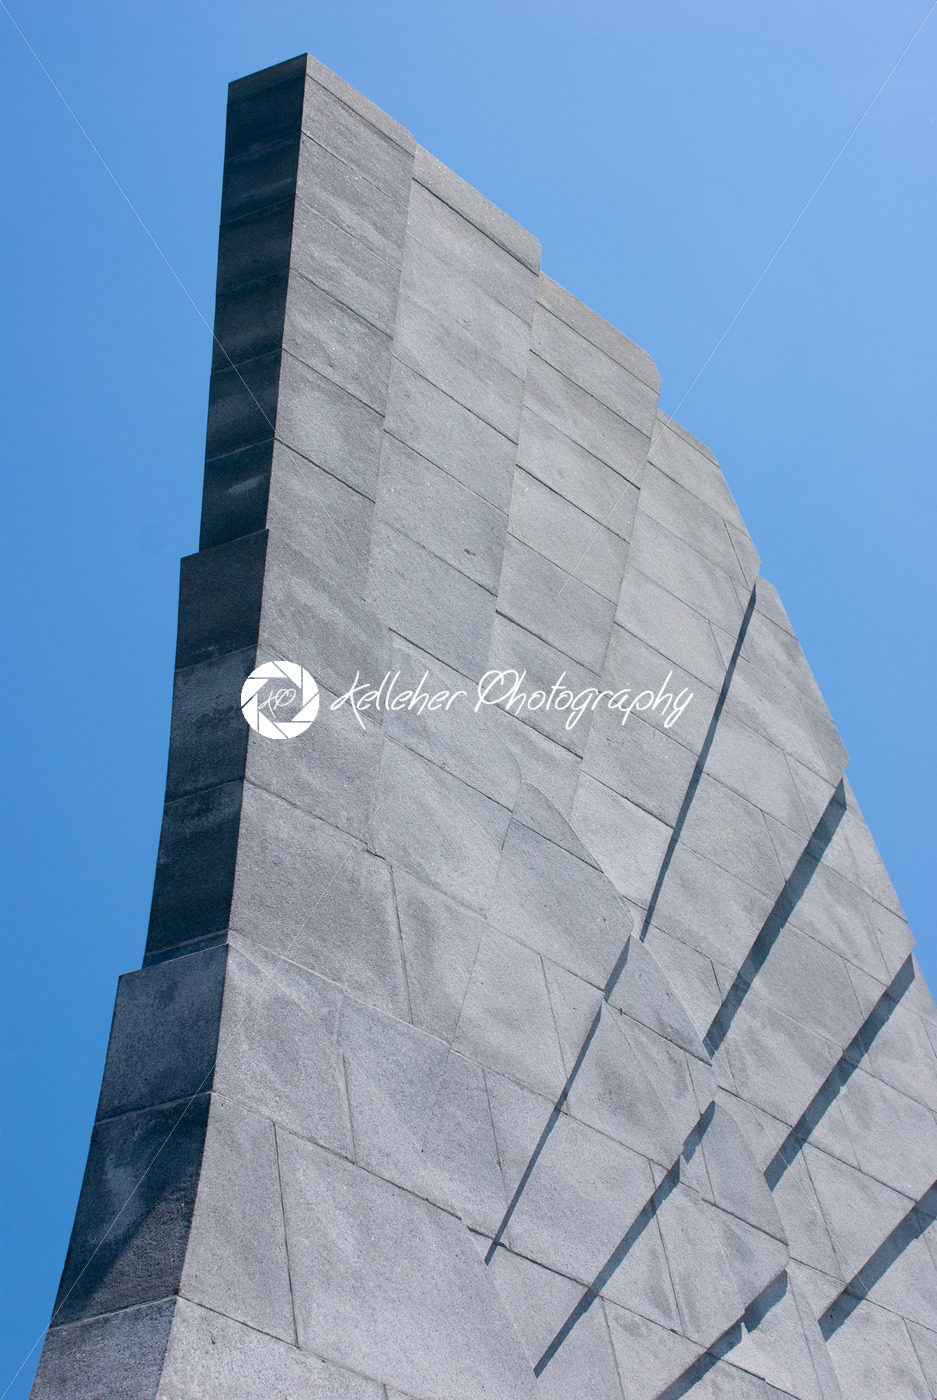 Wright Brothers National Memorial in Kitty Hawk North Carolina - Kelleher Photography Store